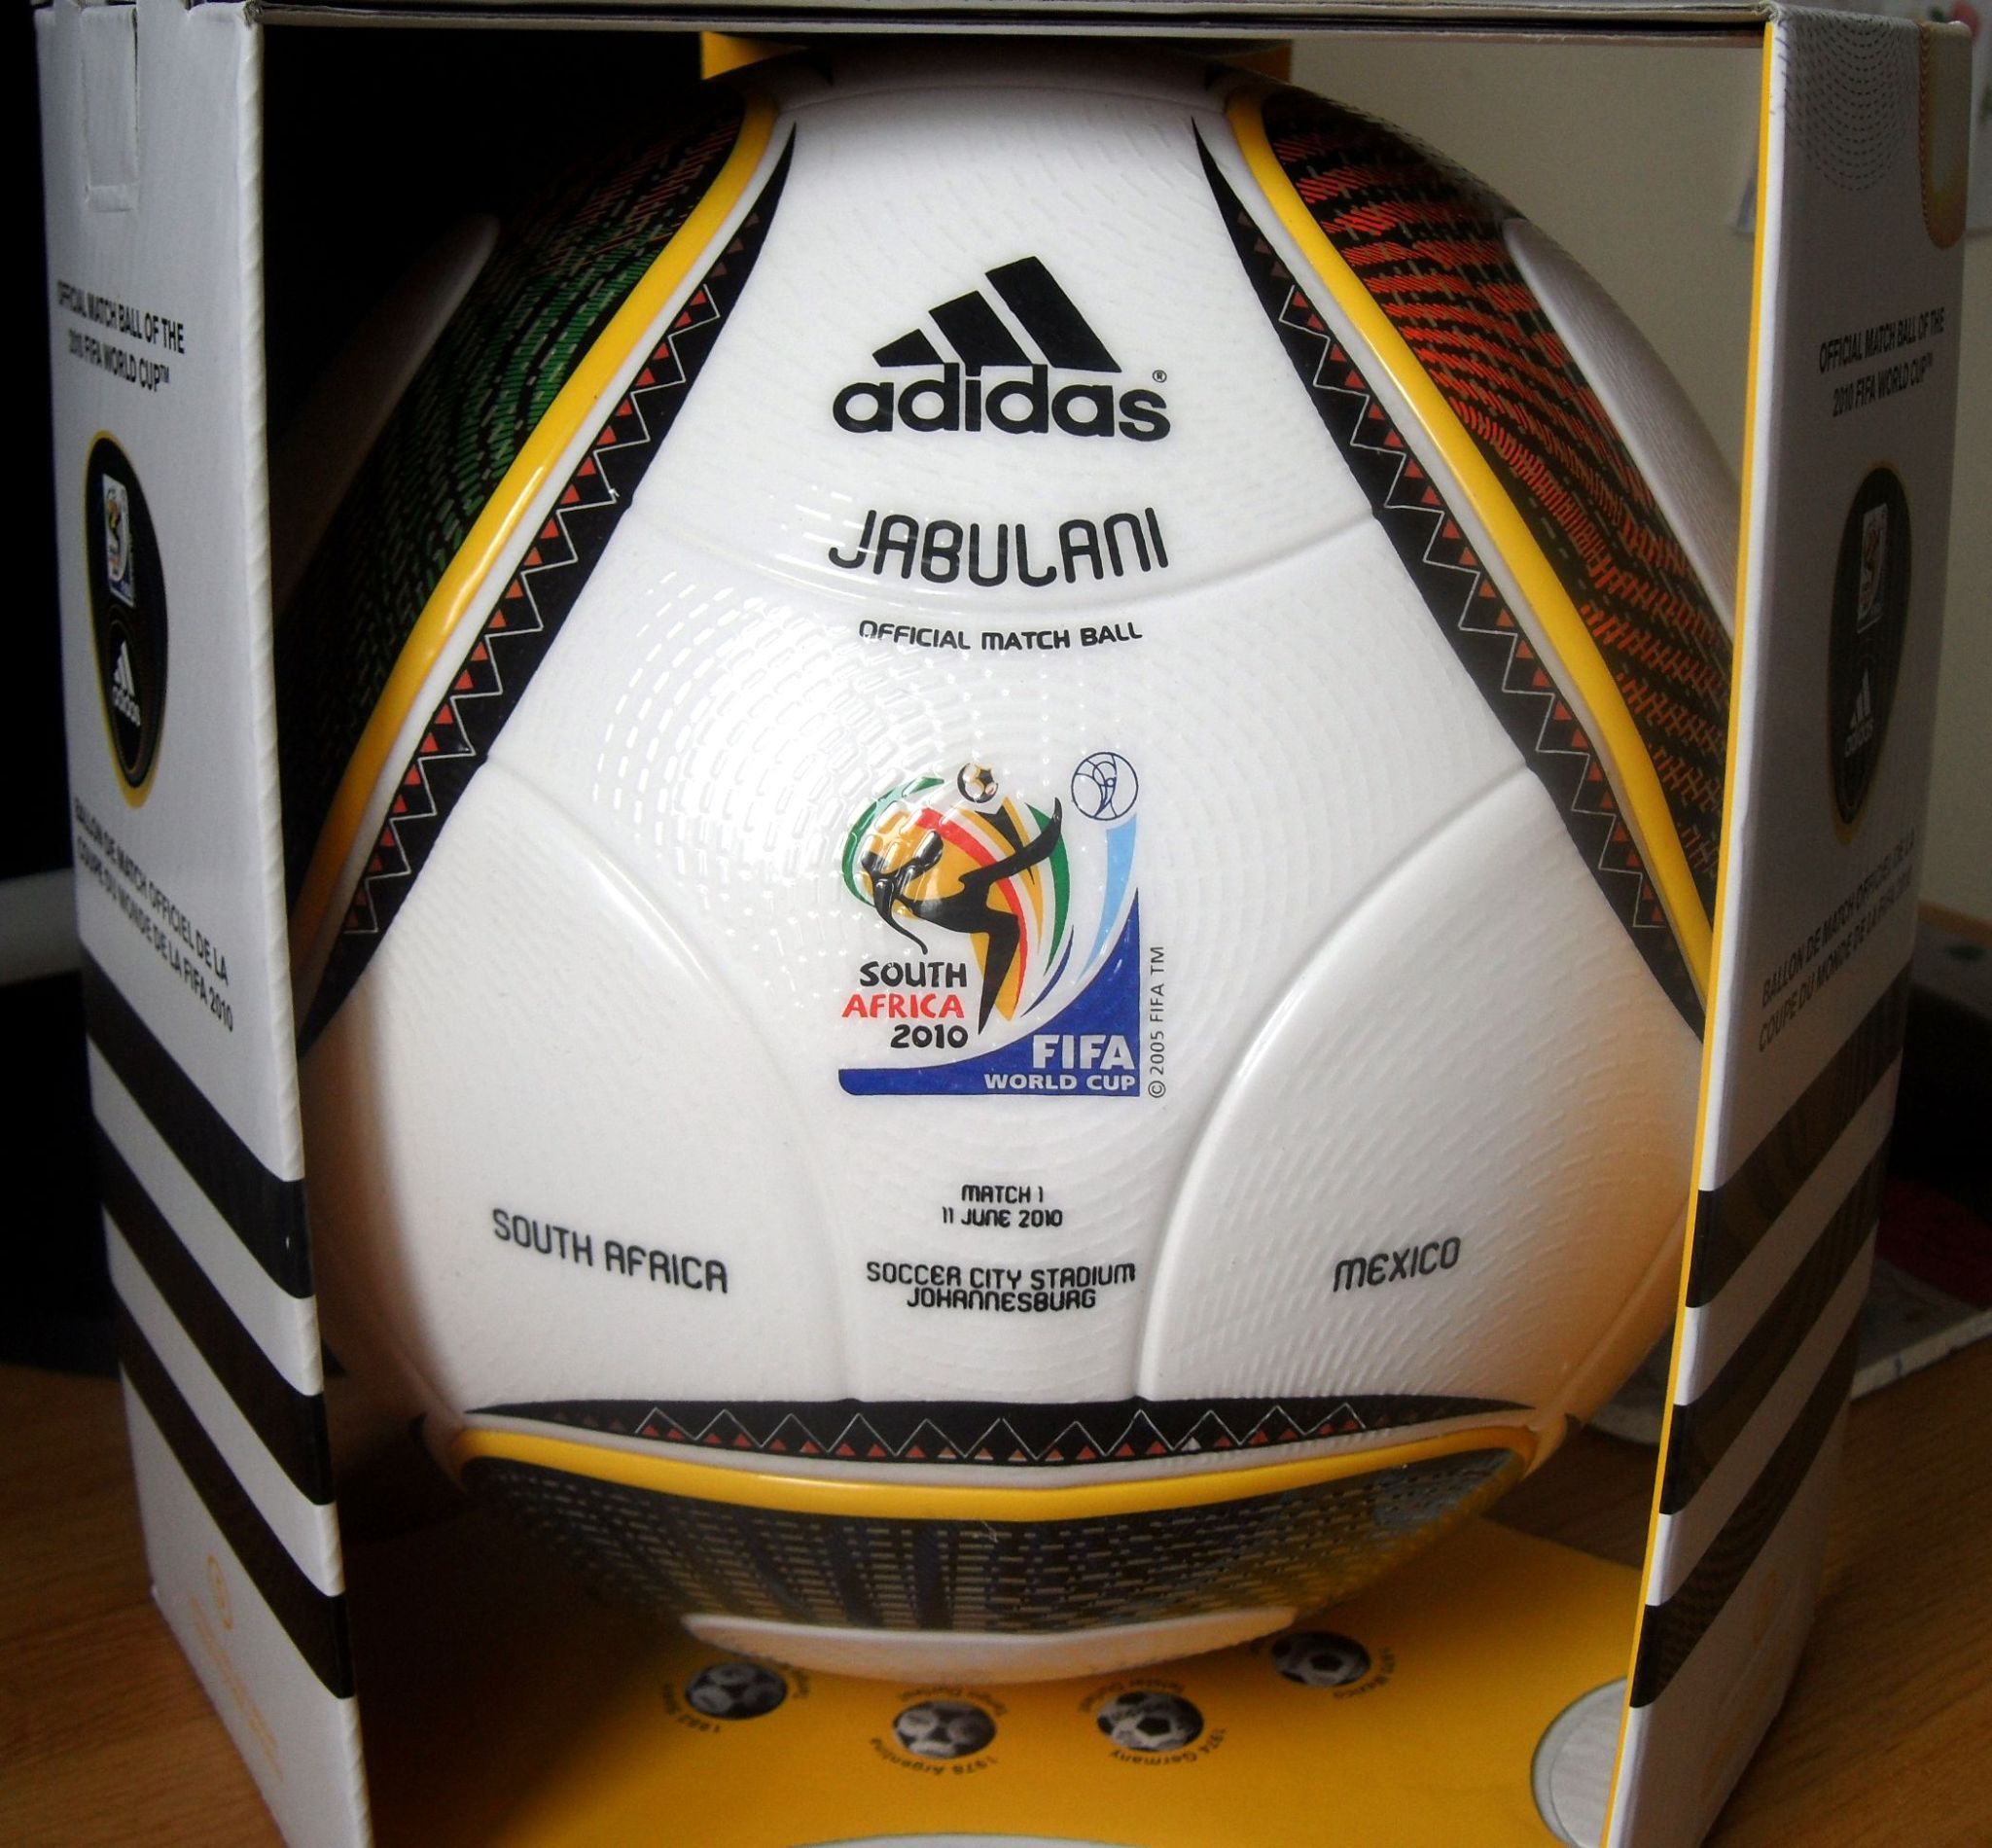 Maestro Dekan Dominerende Made in China match ball FIFA World Cup 2010 South Africa Adidas Jabulani -  www.worldcupballs.info